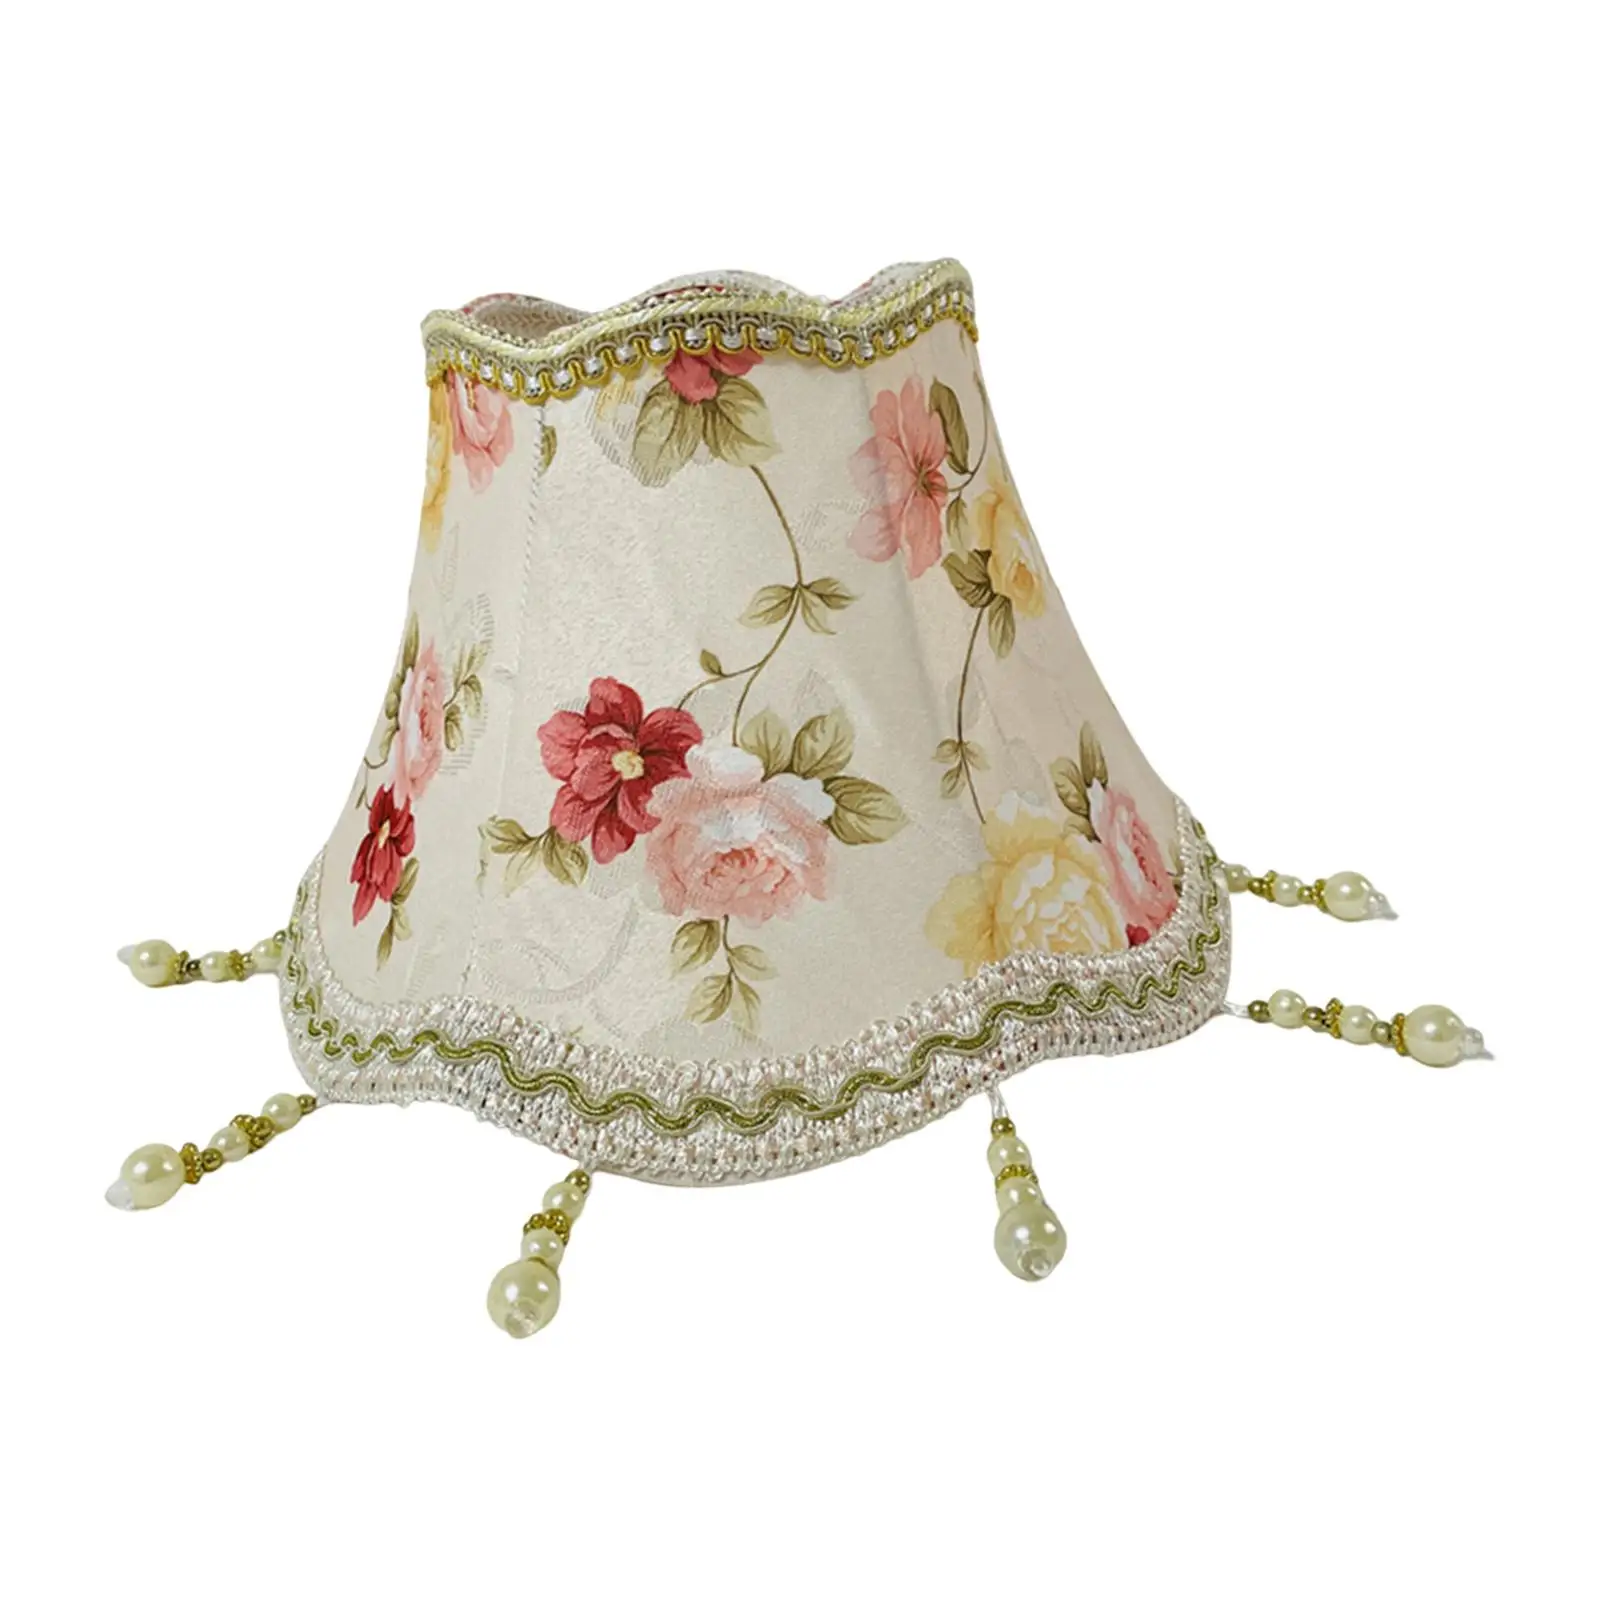 Fabric Lampshade E27 Base Fringe Lamp Shade Replacement Cloth Lampshade with Beads for Home Living Room Restaurant